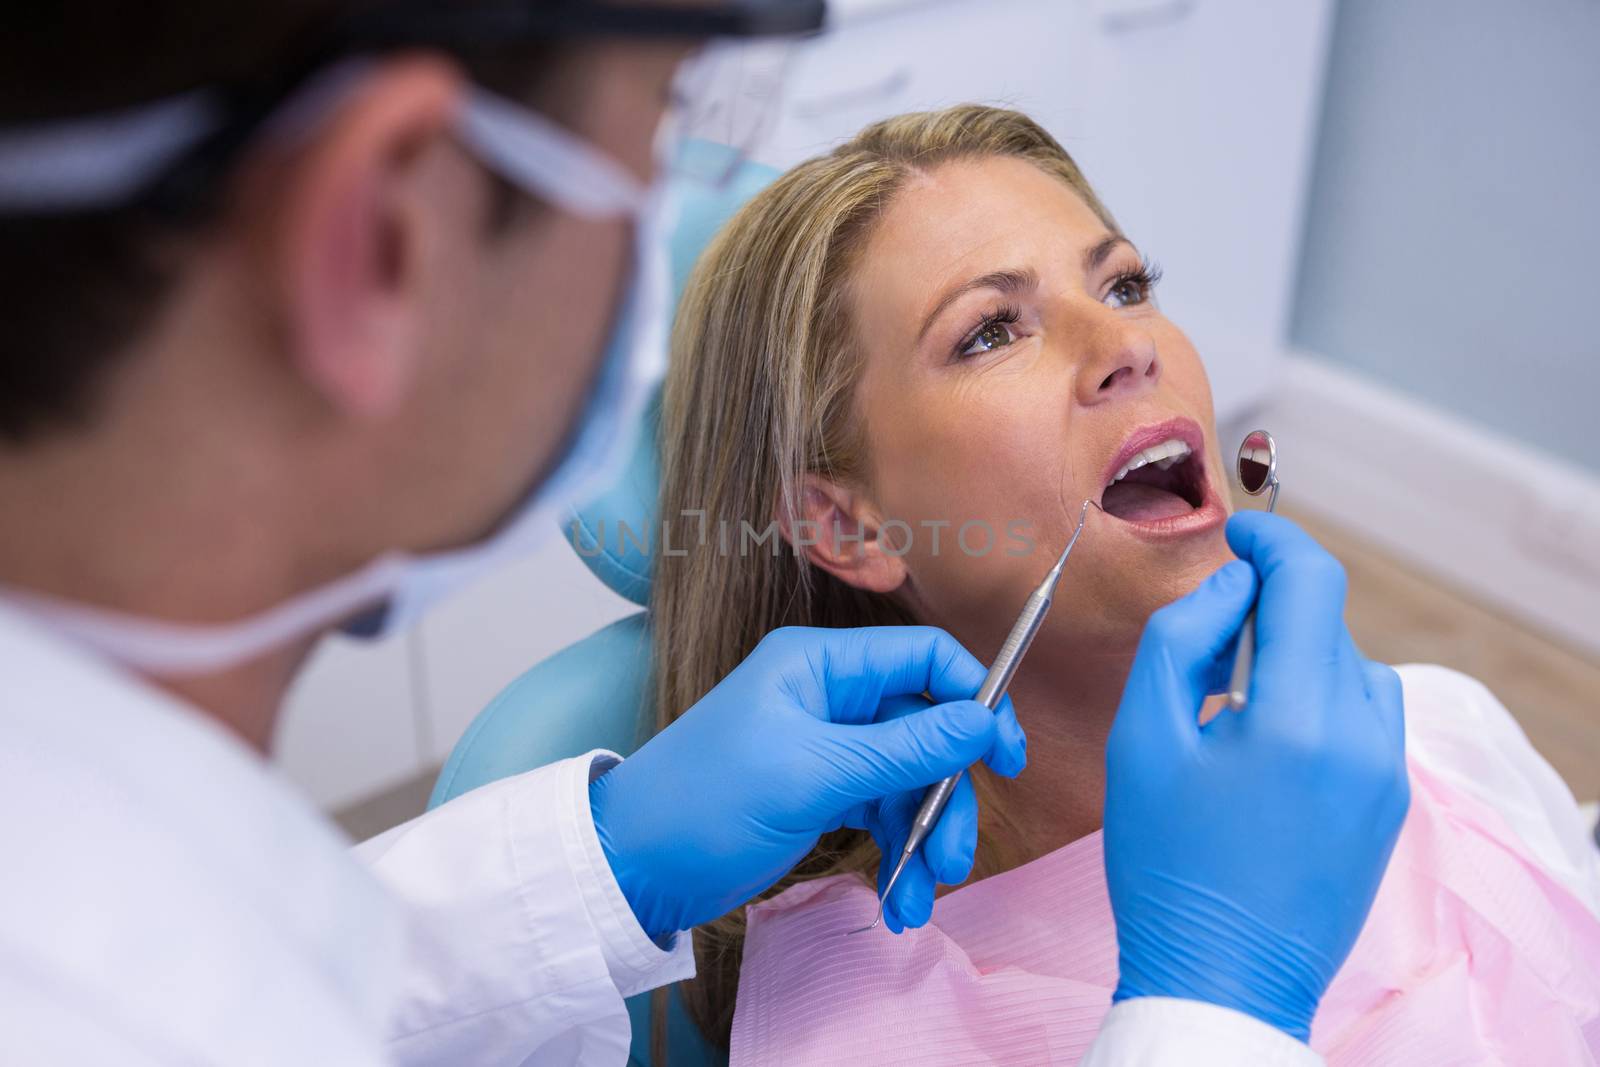 Dentist examining woman mouth at clinic by Wavebreakmedia